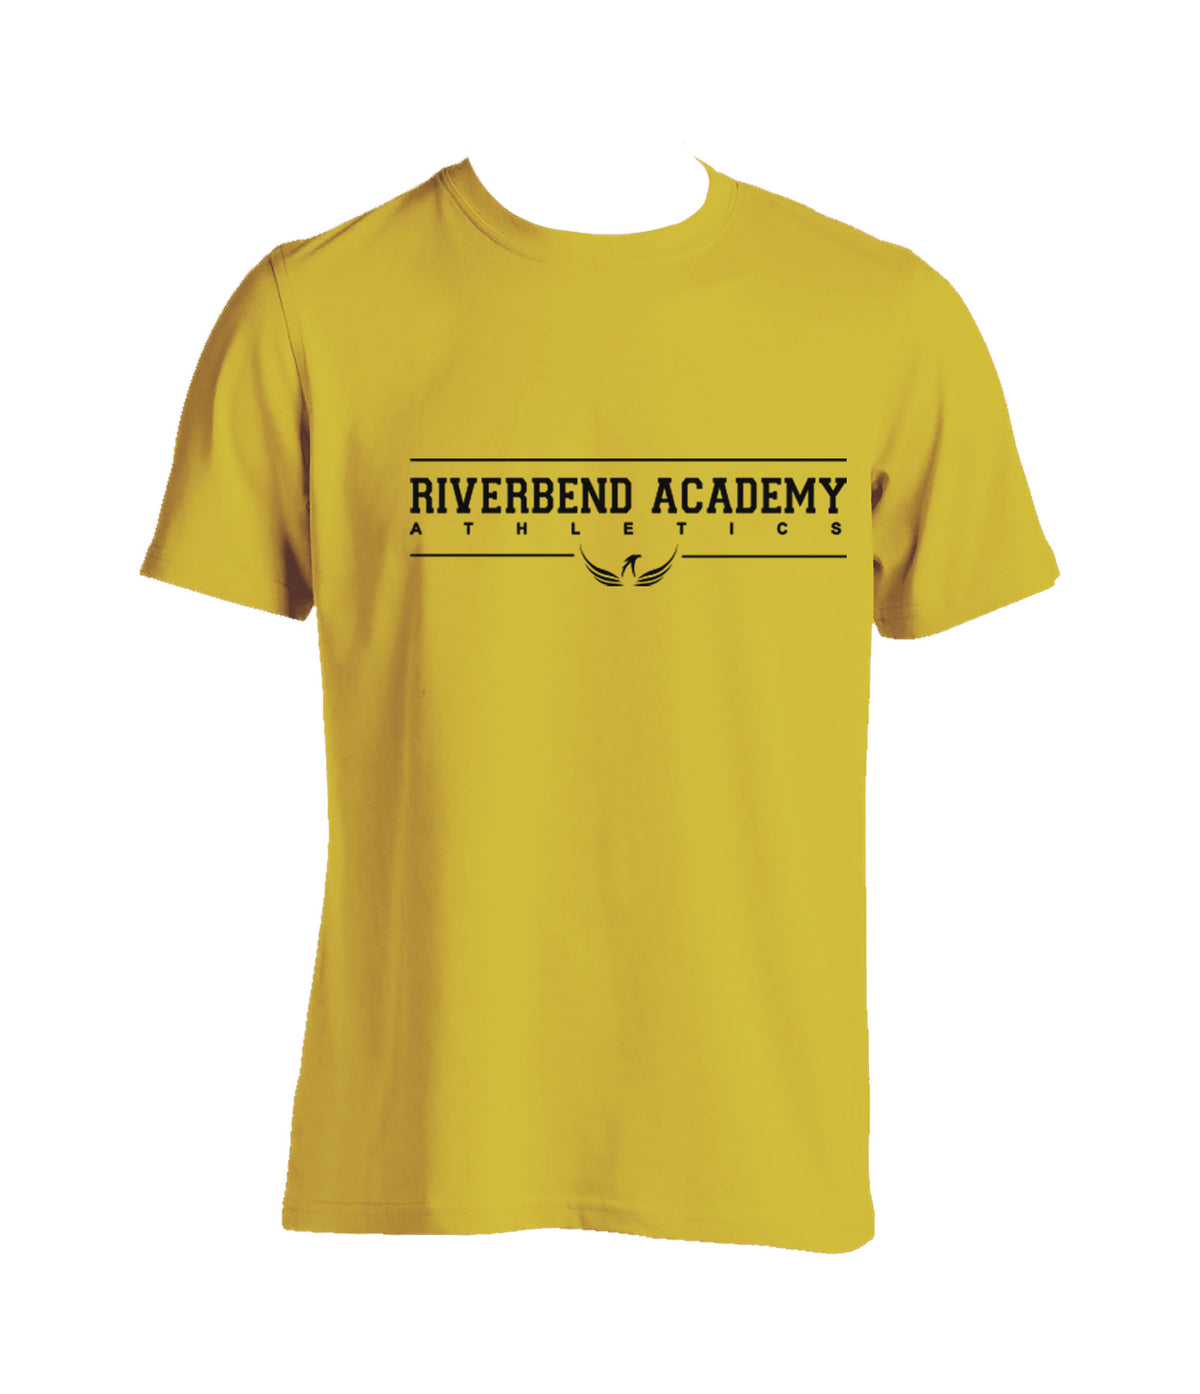 RIVERBEND ACADEMY GYM T-SHIRT, COTTON, YOUTH